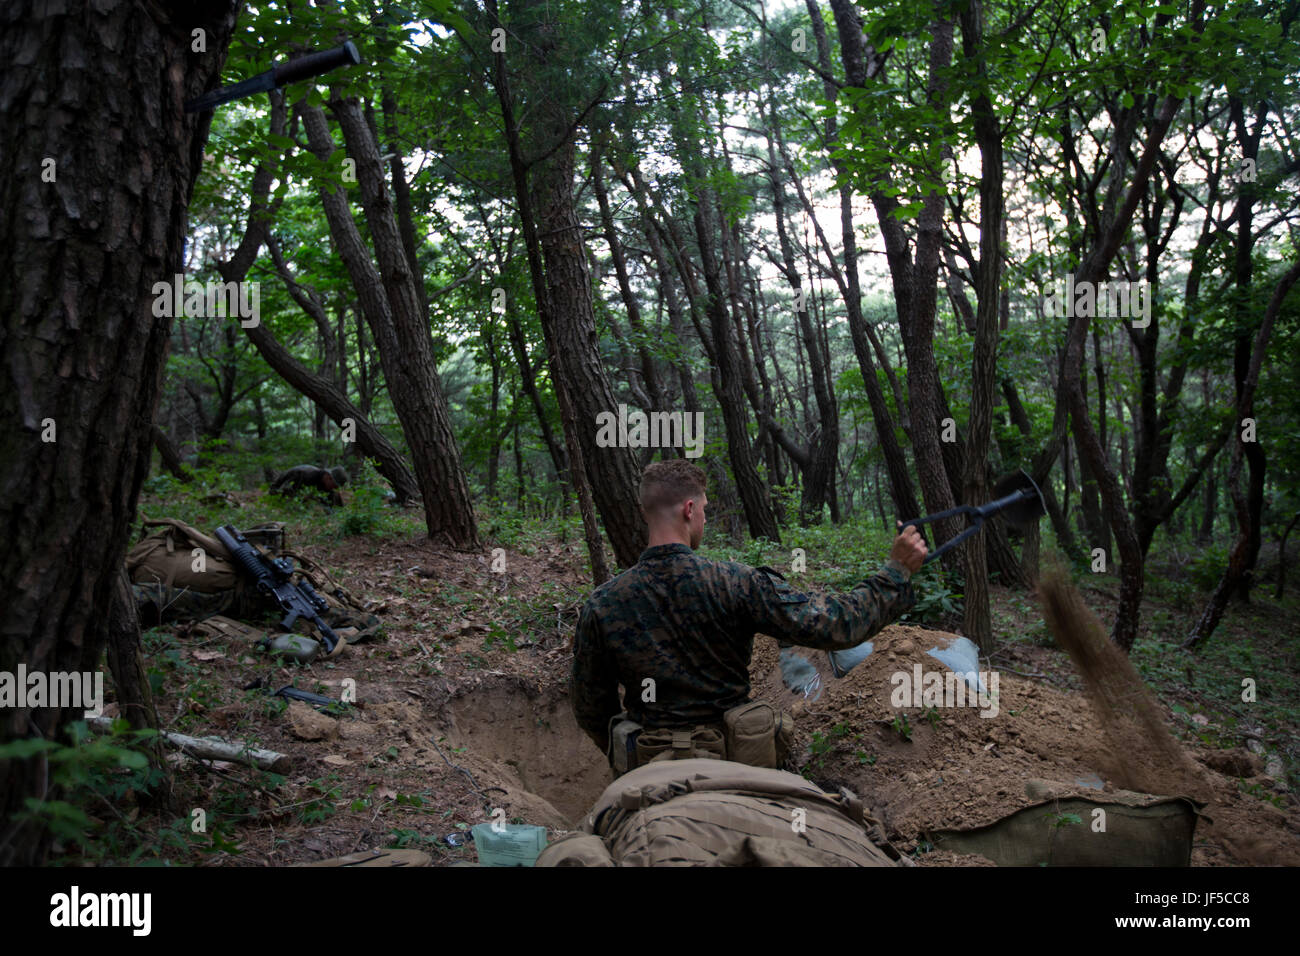 U.S. Marines and Sailors assigned to India Company, 3rd Battalion, 8th Marine Regiment, forward deployed to the 3rd Marine Division, as part of the forward Unit Deployed Program, dig two man fighting holes in a defensive position at Camp Mujuk, South Korea, May 30, 2017. Fighting holes are used to give Marines protection and the ability to provide fire while in a defensive position. (U.S. Marine Corps photo by Cpl. David A. Diggs) Stock Photo